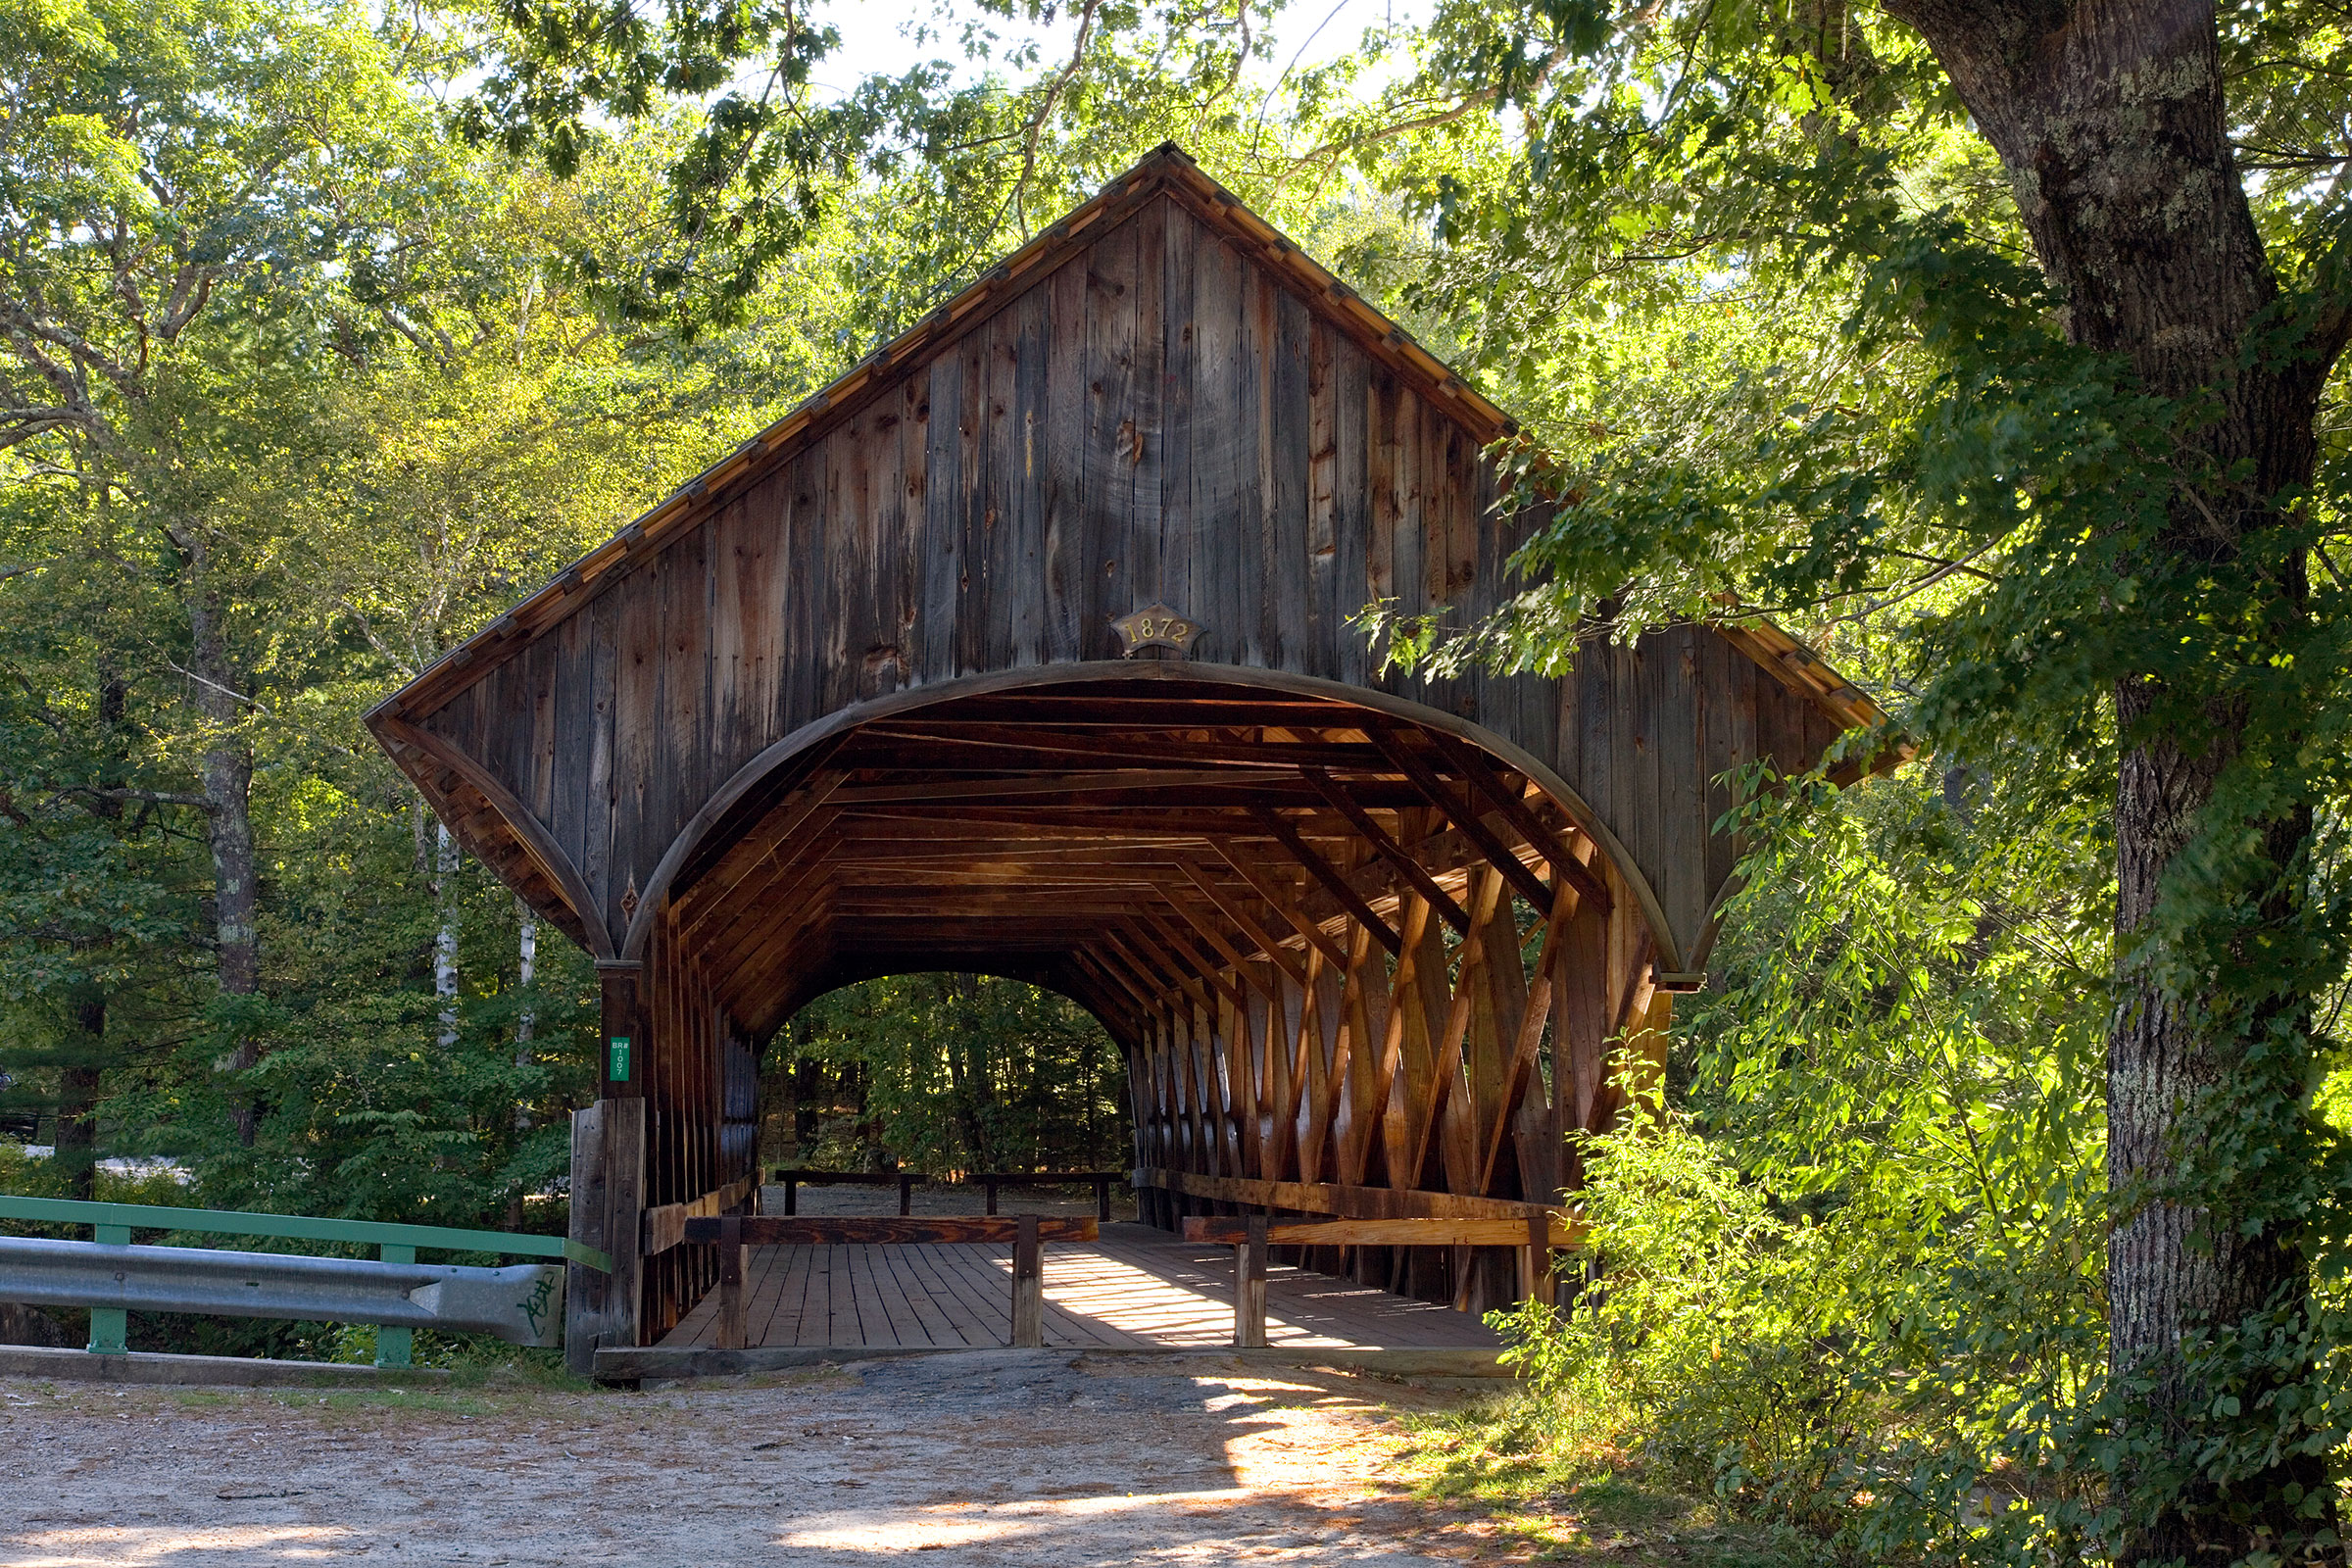 Sunday River Covered Bridge also known as the Artists Bridge